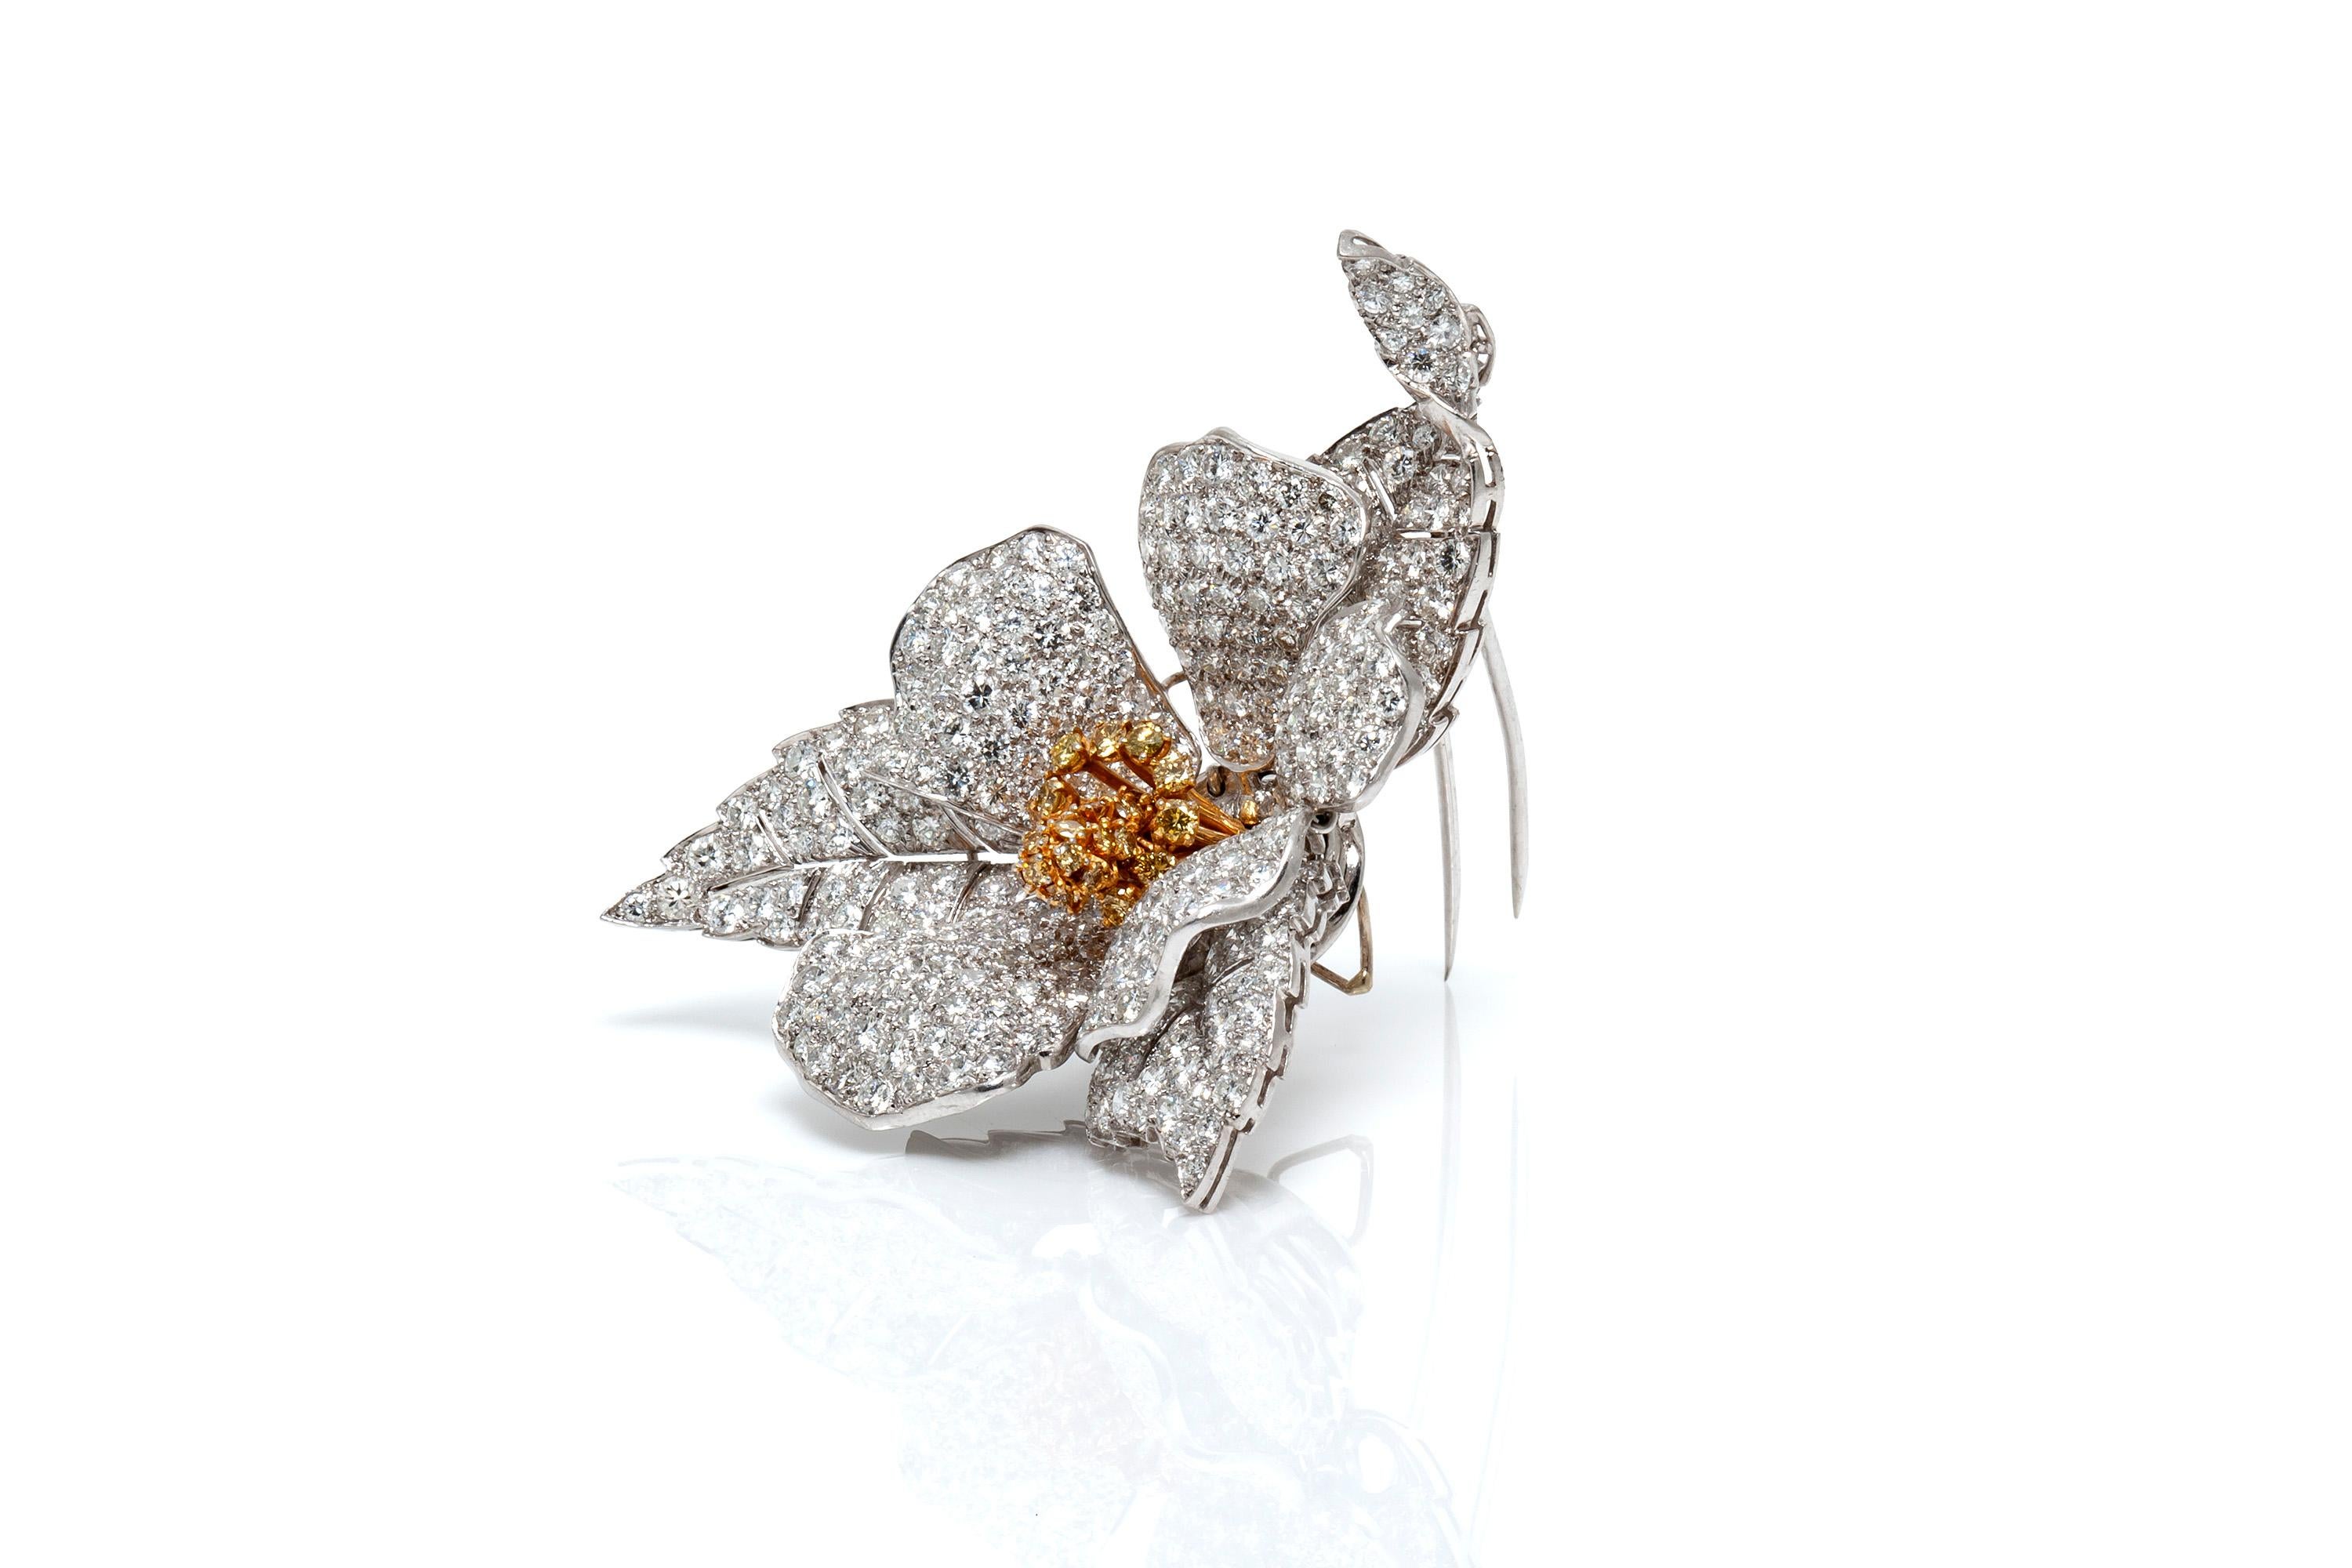 French flower brooch, finely crafted in platinum with diamonds weighing approximately a total of 26.00 carats.